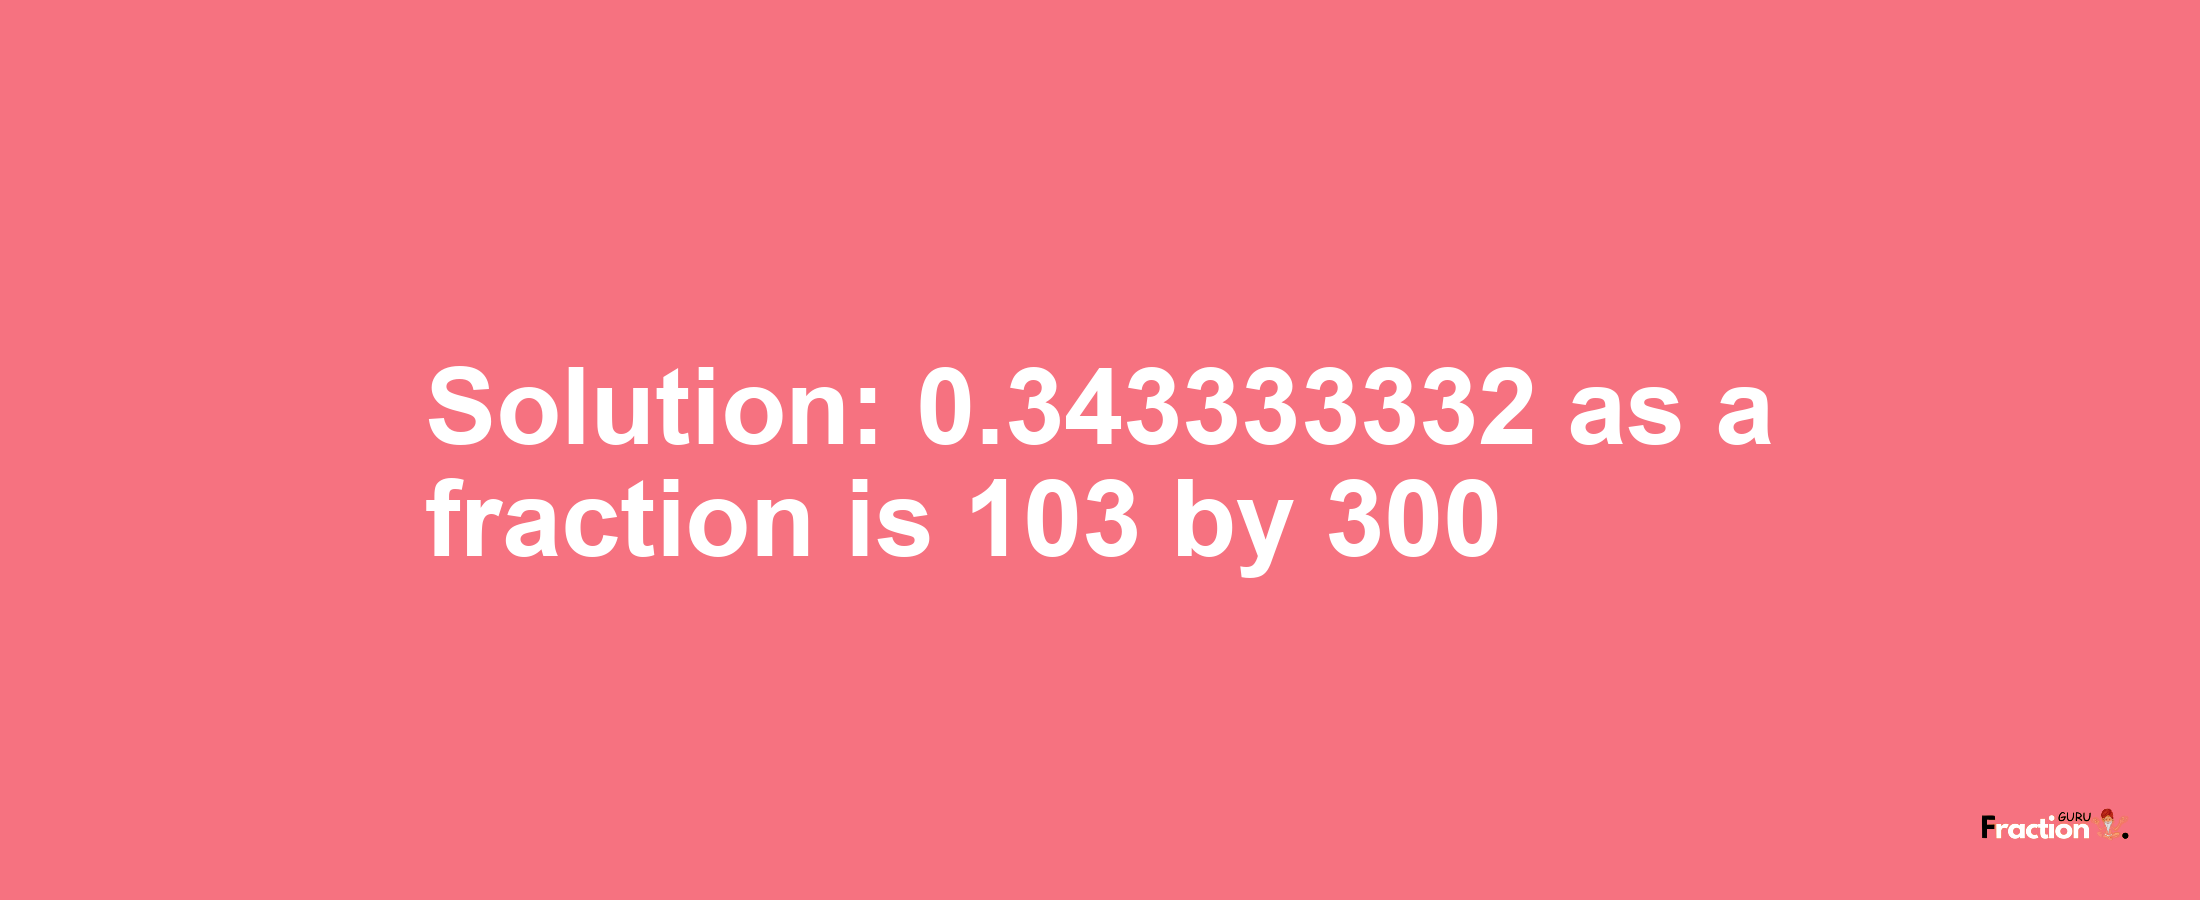 Solution:0.343333332 as a fraction is 103/300